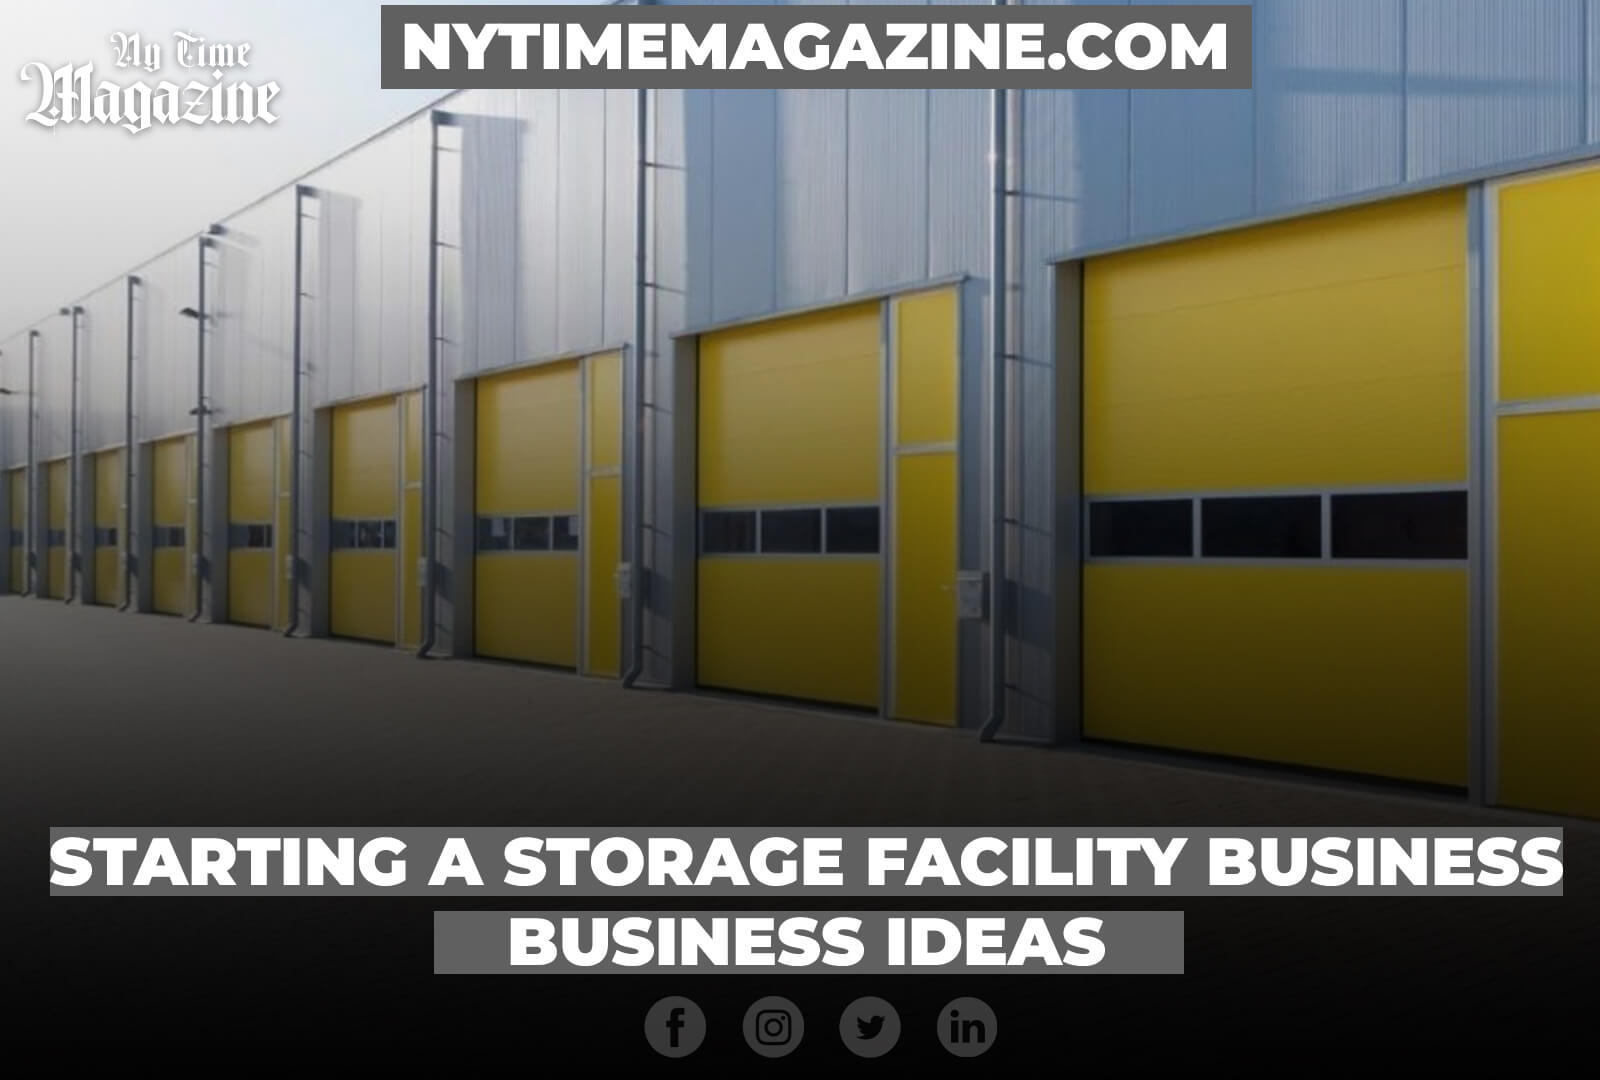 Starting a Storage Facility Business - Business Ideas